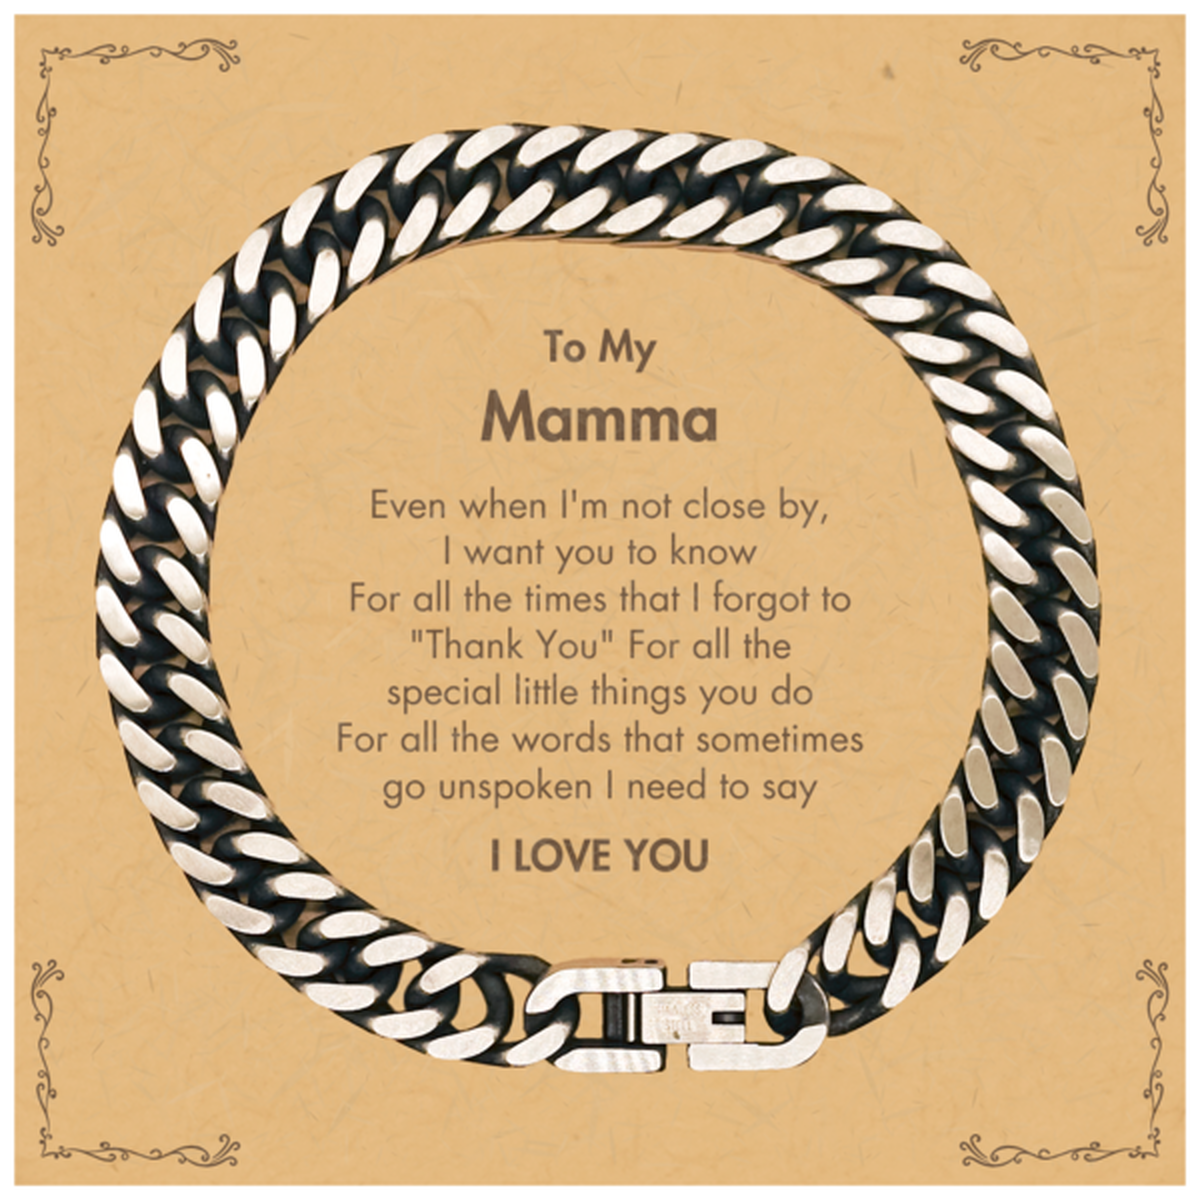 Thank You Gifts for Mamma, Keepsake Cuban Link Chain Bracelet Gifts for Mamma Birthday Mother's day Father's Day Mamma For all the words That sometimes go unspoken I need to say I LOVE YOU